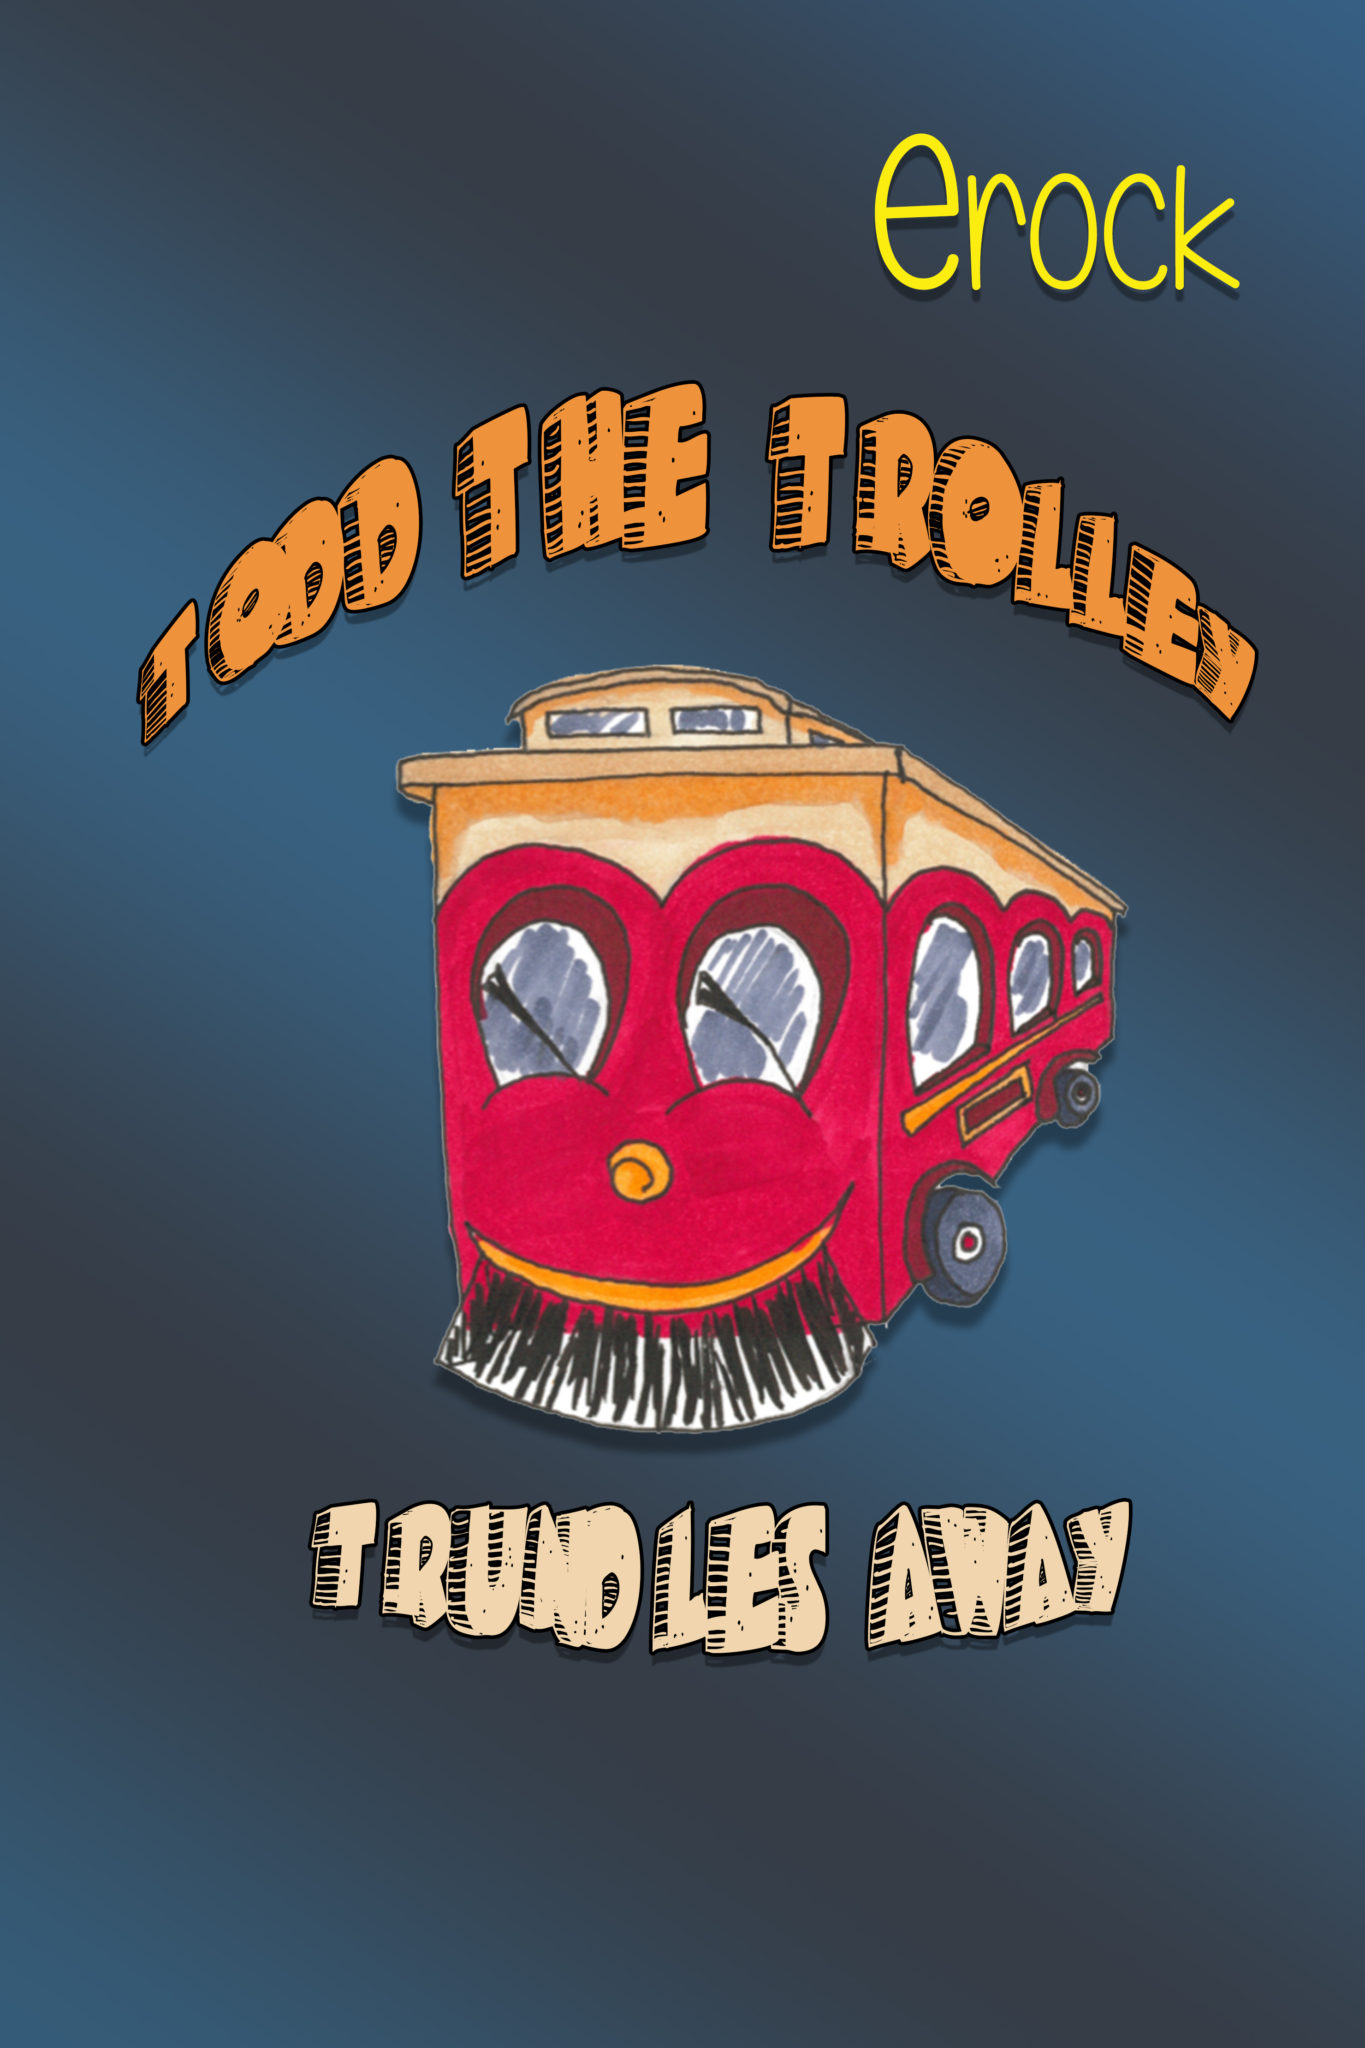 FREE: Todd the Trolley Trundles Away by Erock